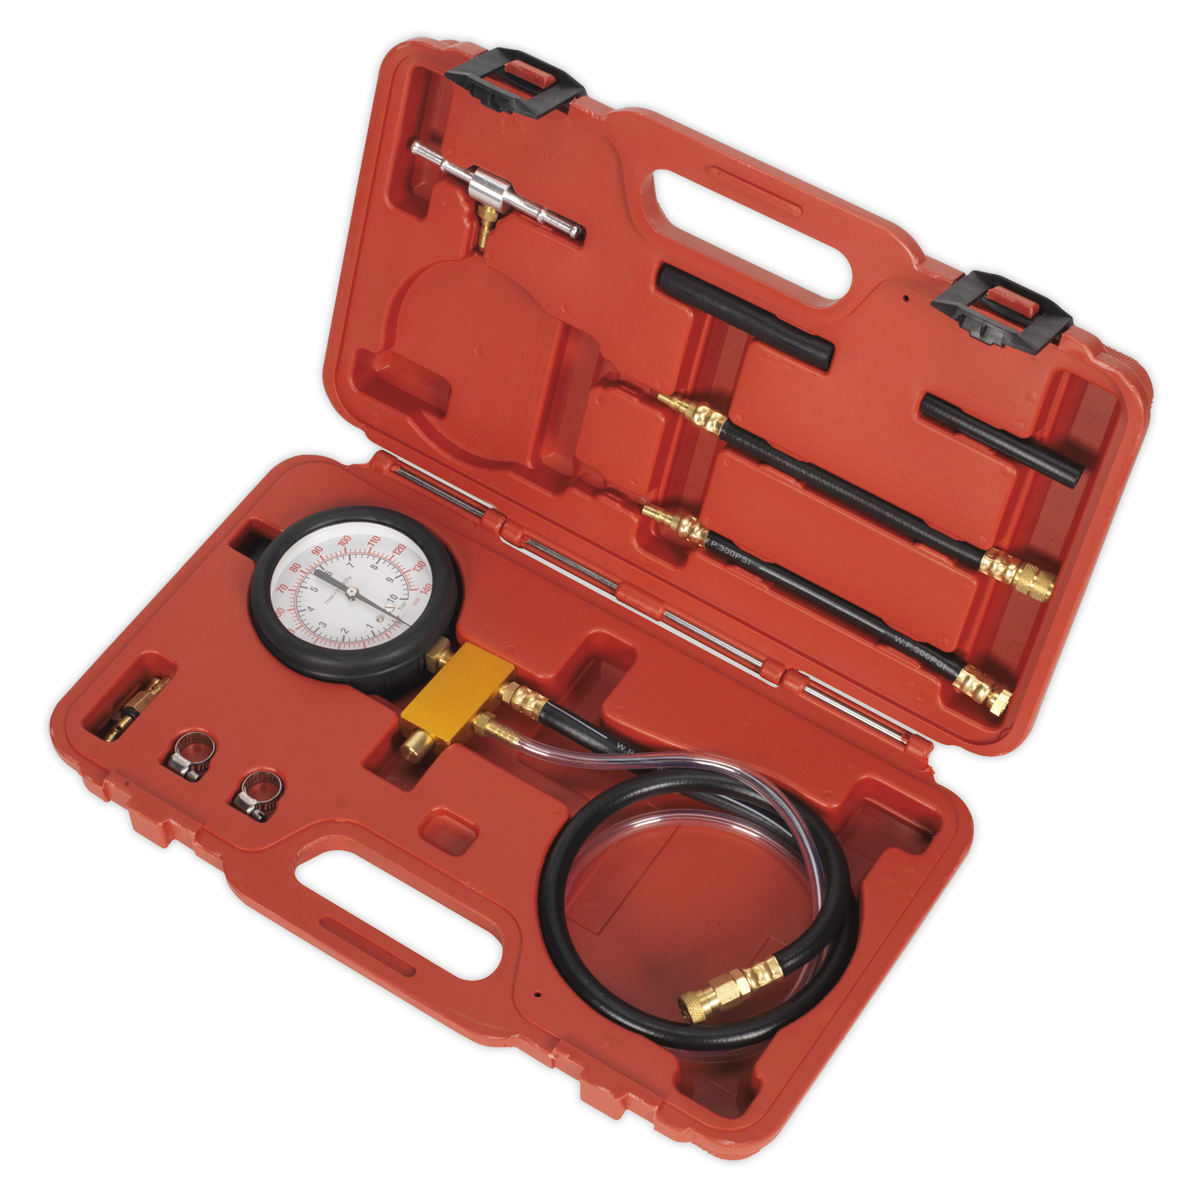 Sealey vehicle service Comprehensive kit of adaptors and fittings for modern Schrader test-port fuel injection systems